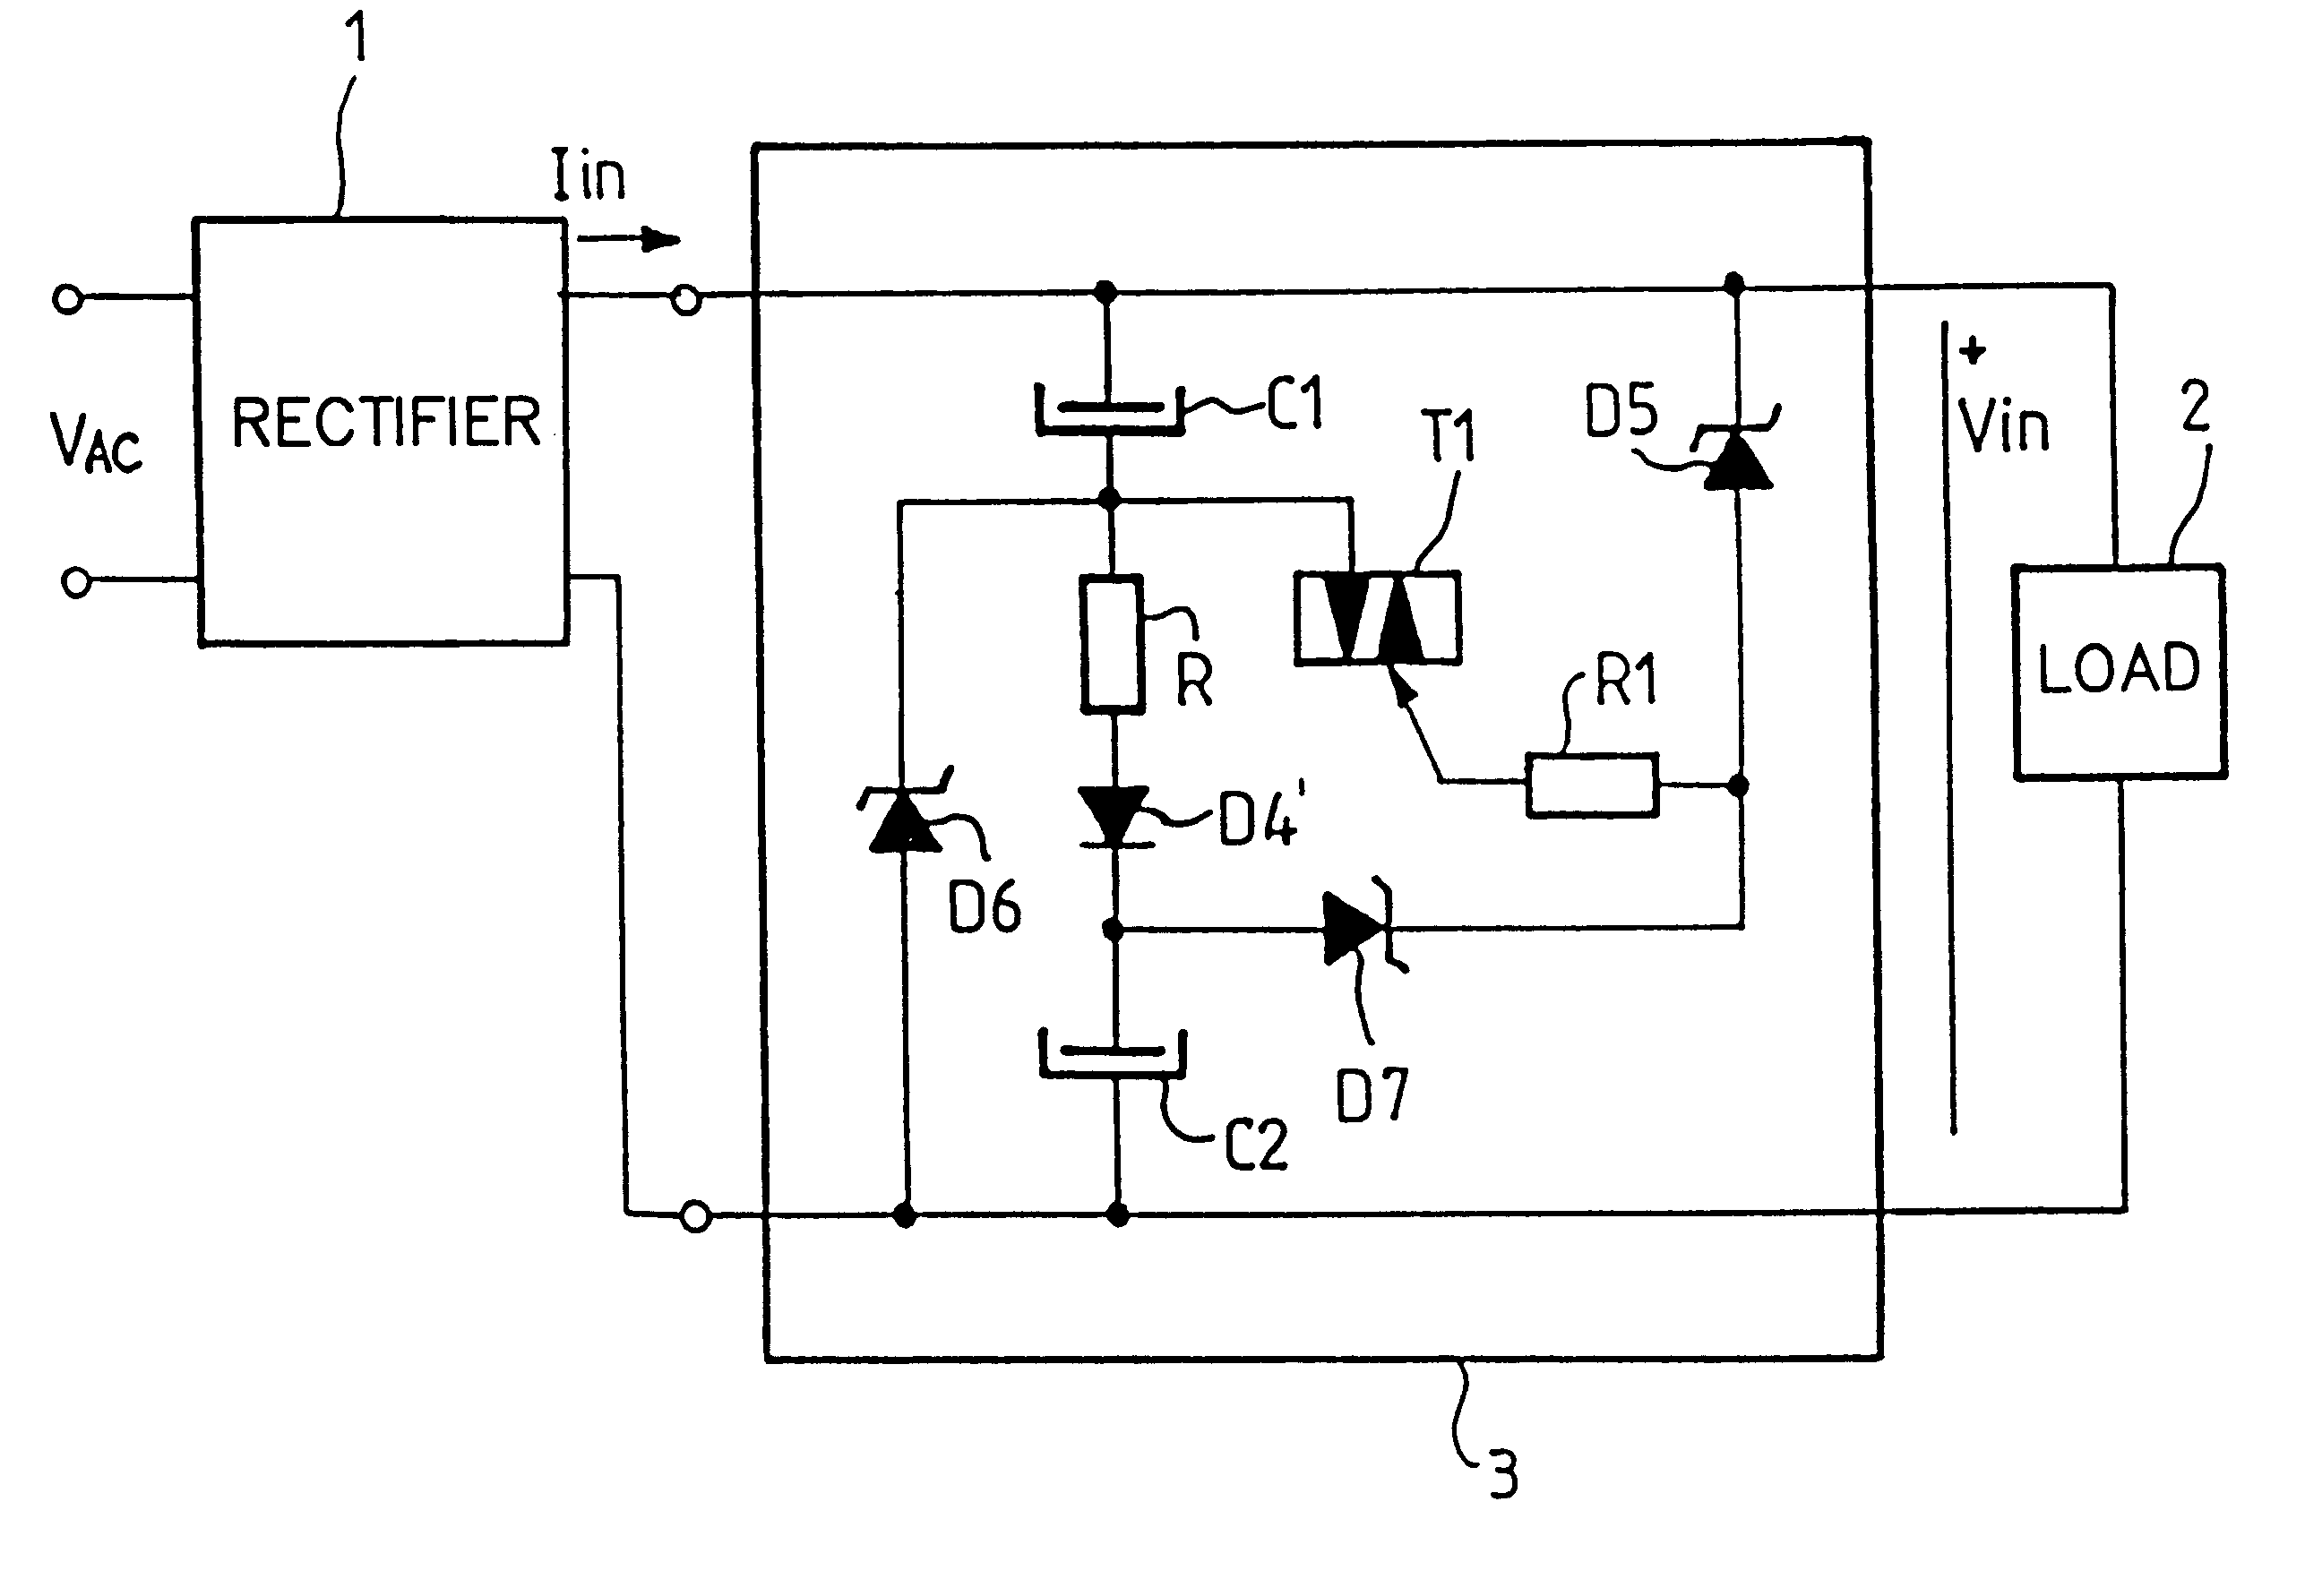 Electronic power supply device